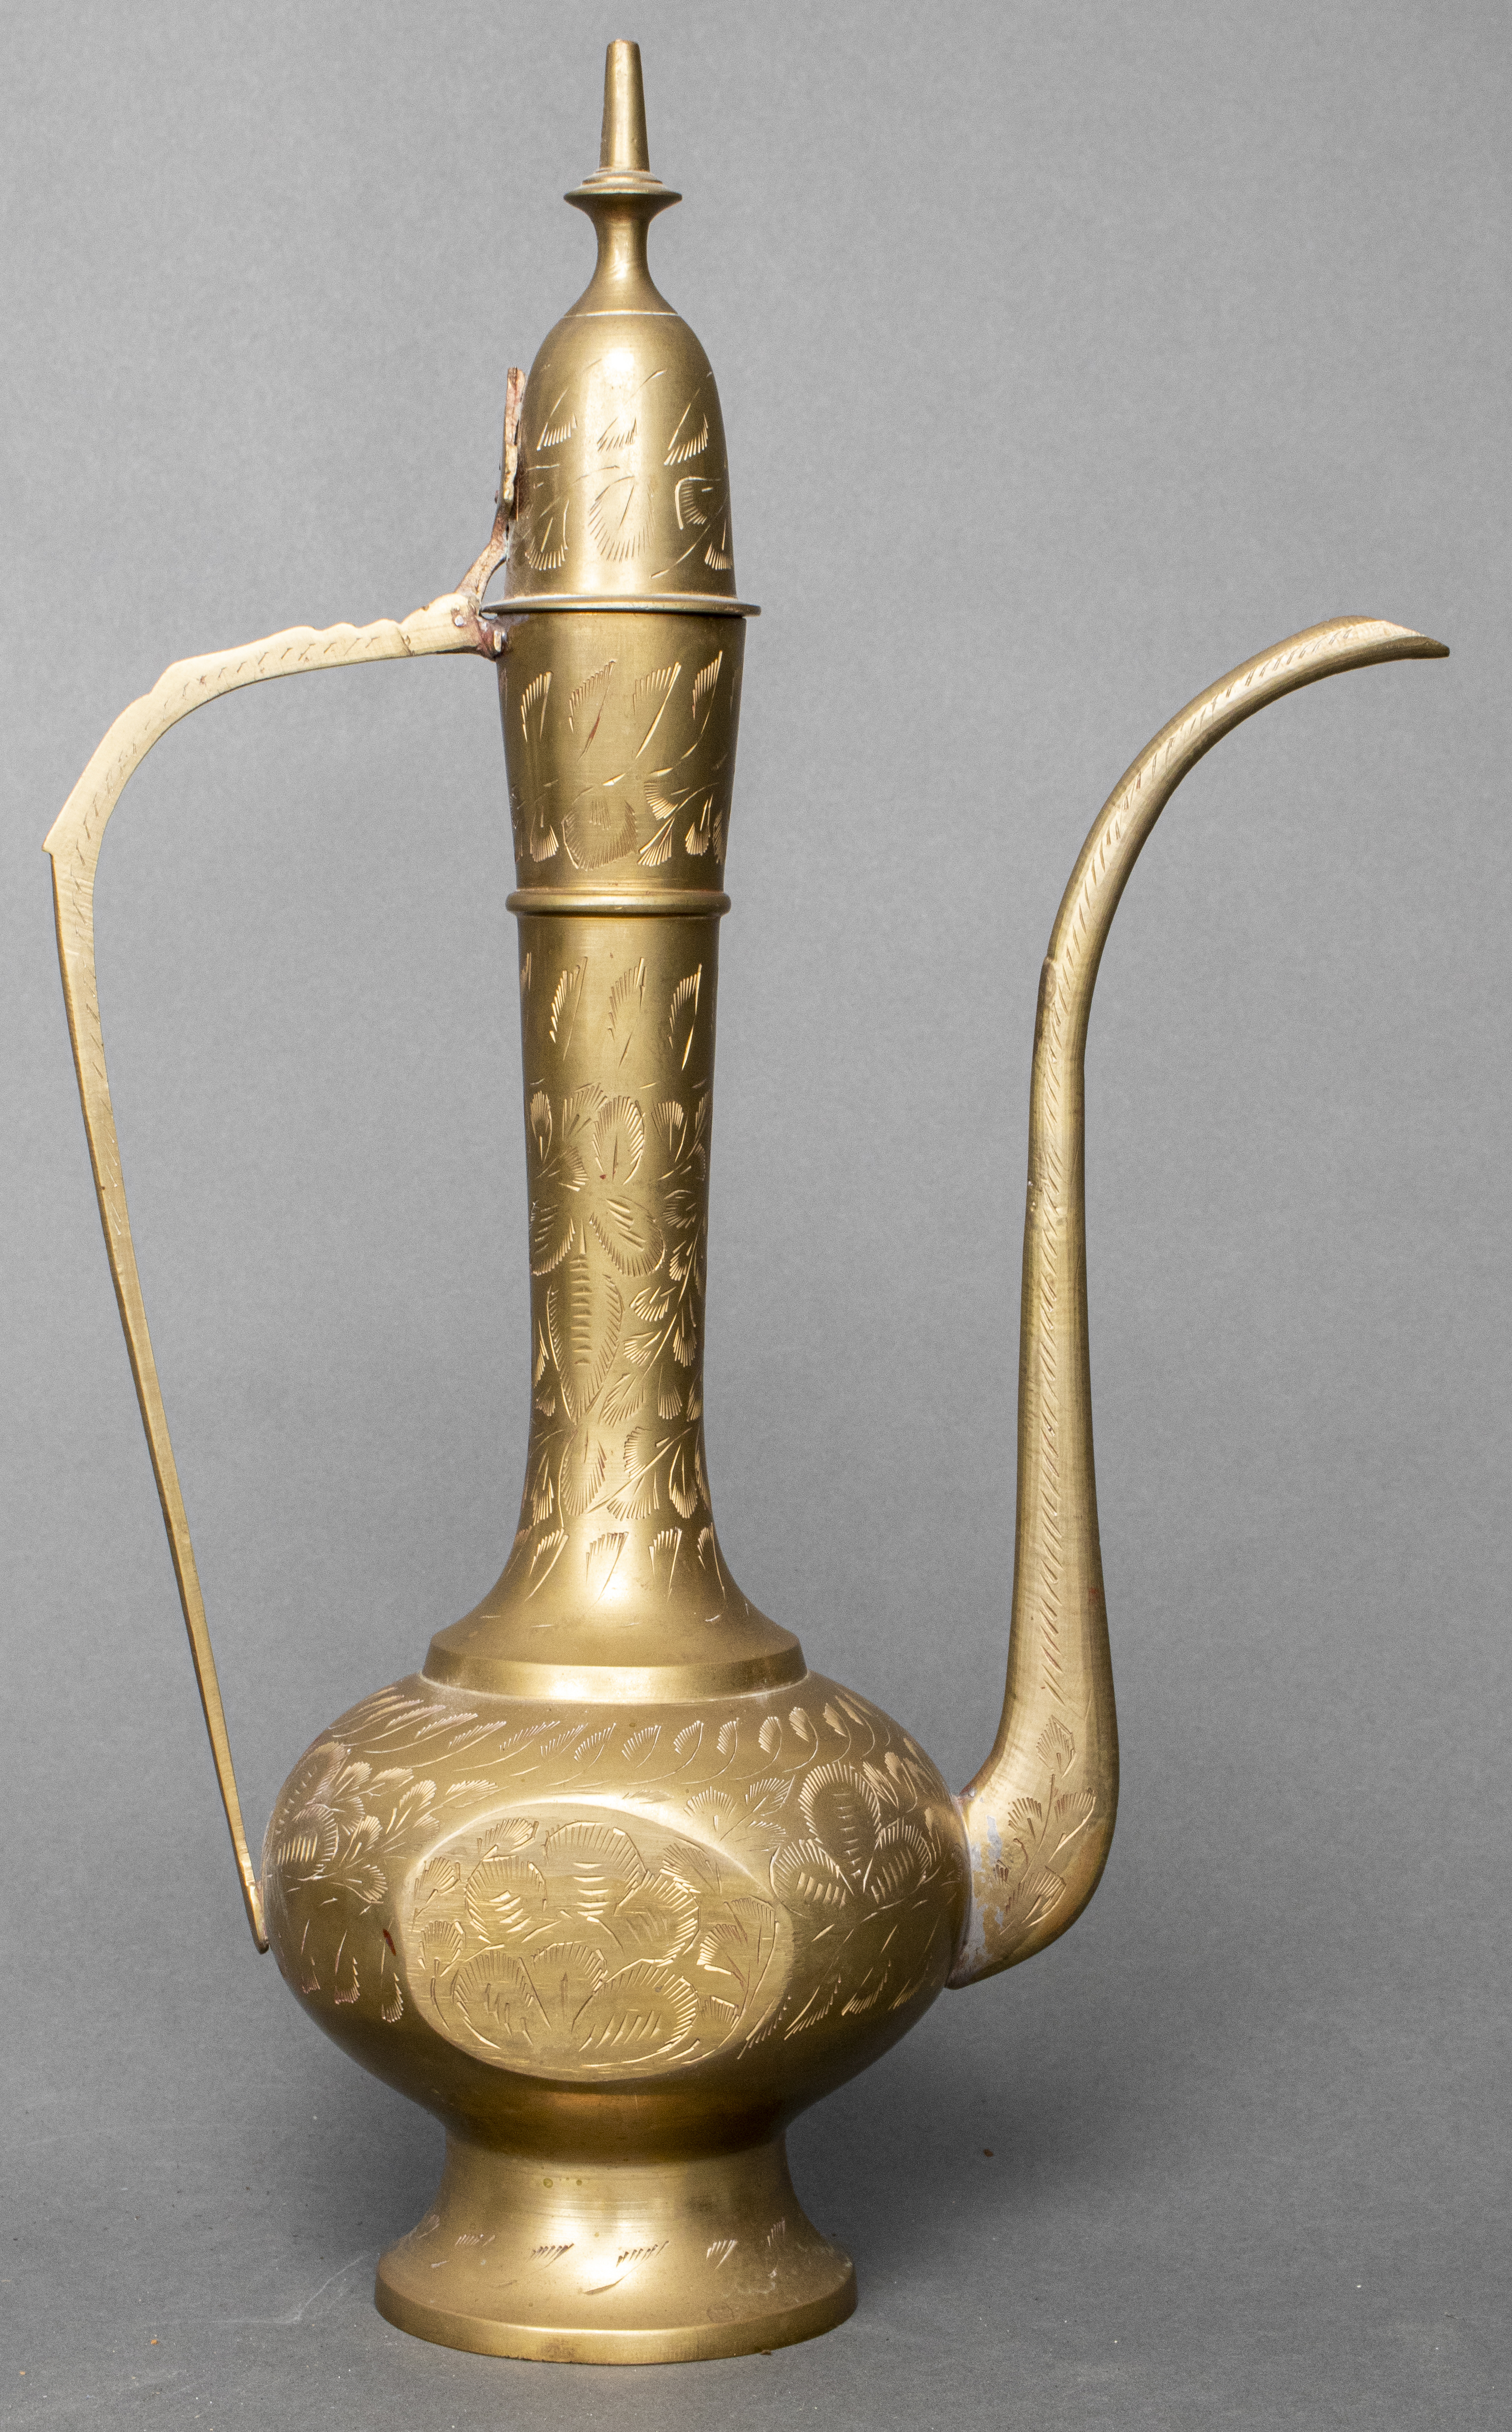 PERSIAN BRASS AFTABA WATER PITCHER